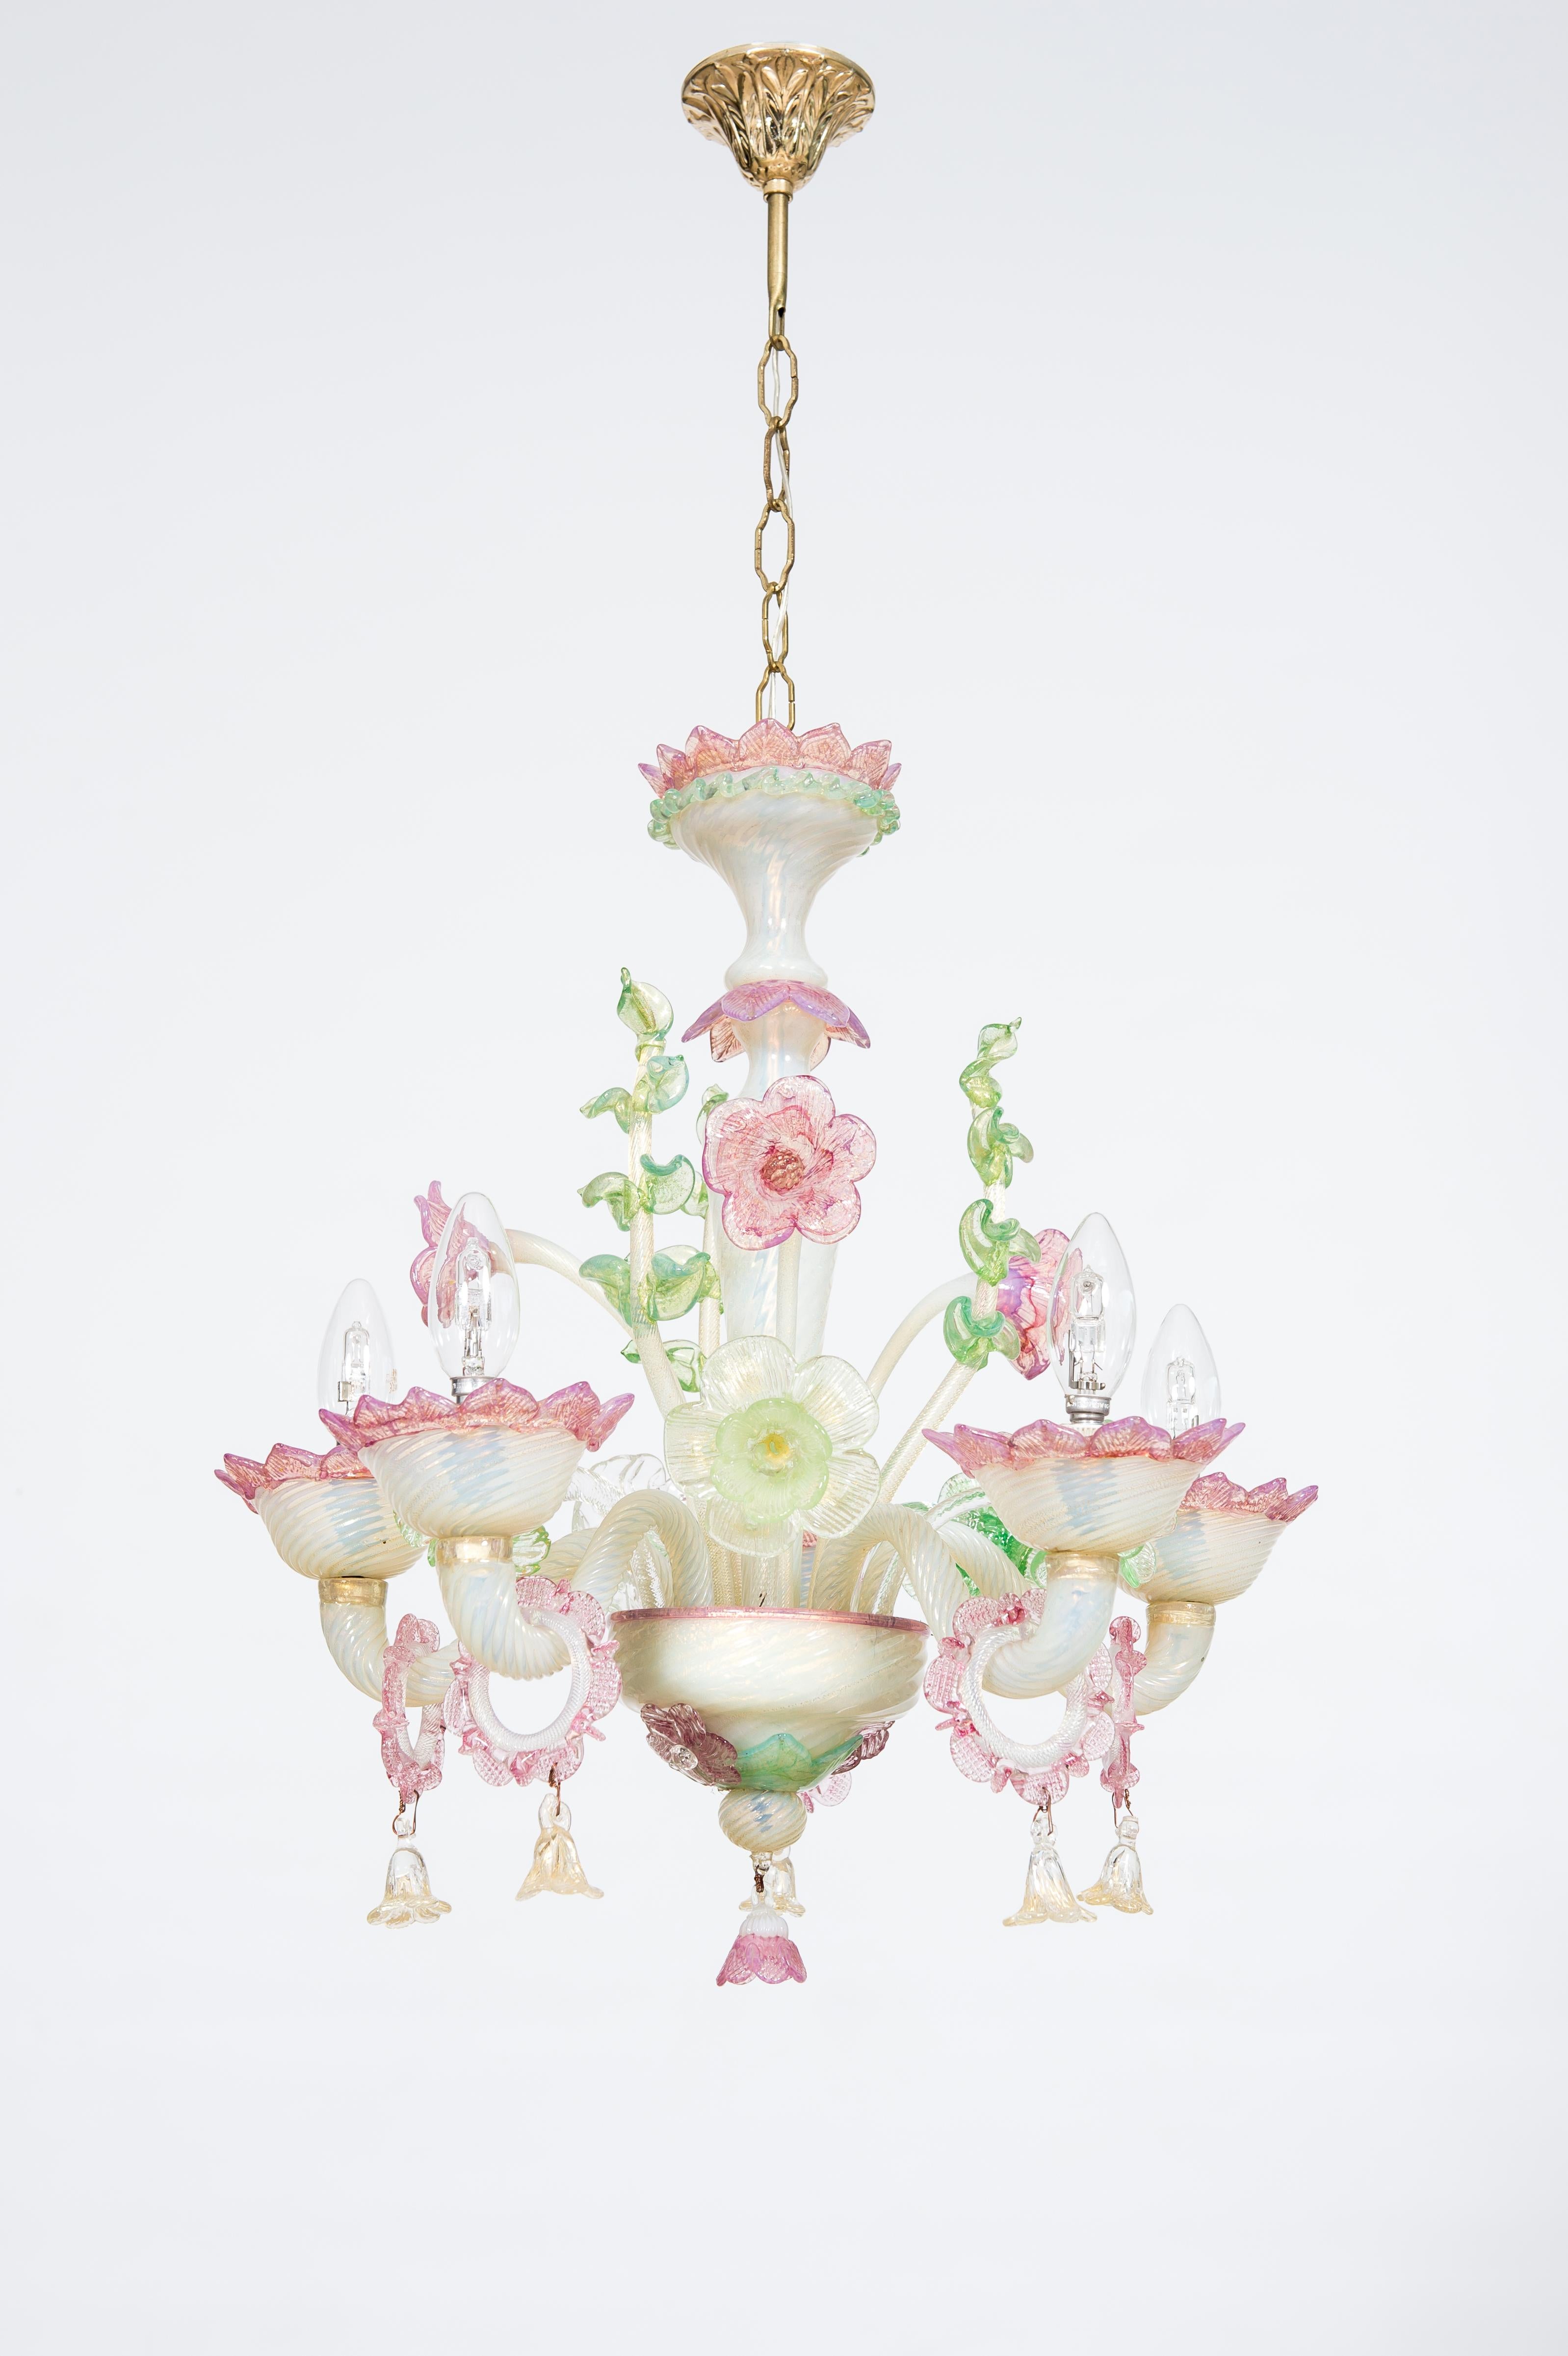 Floral Opaline Murano Glass Chandelier with Gold Handcrafted in Italy 1900s.
This fine opaline chandelier, handcrafted in Murano Island (Venice area Italy) in the 1900s, stands out for its colorful floral decorations embellished with a layer of